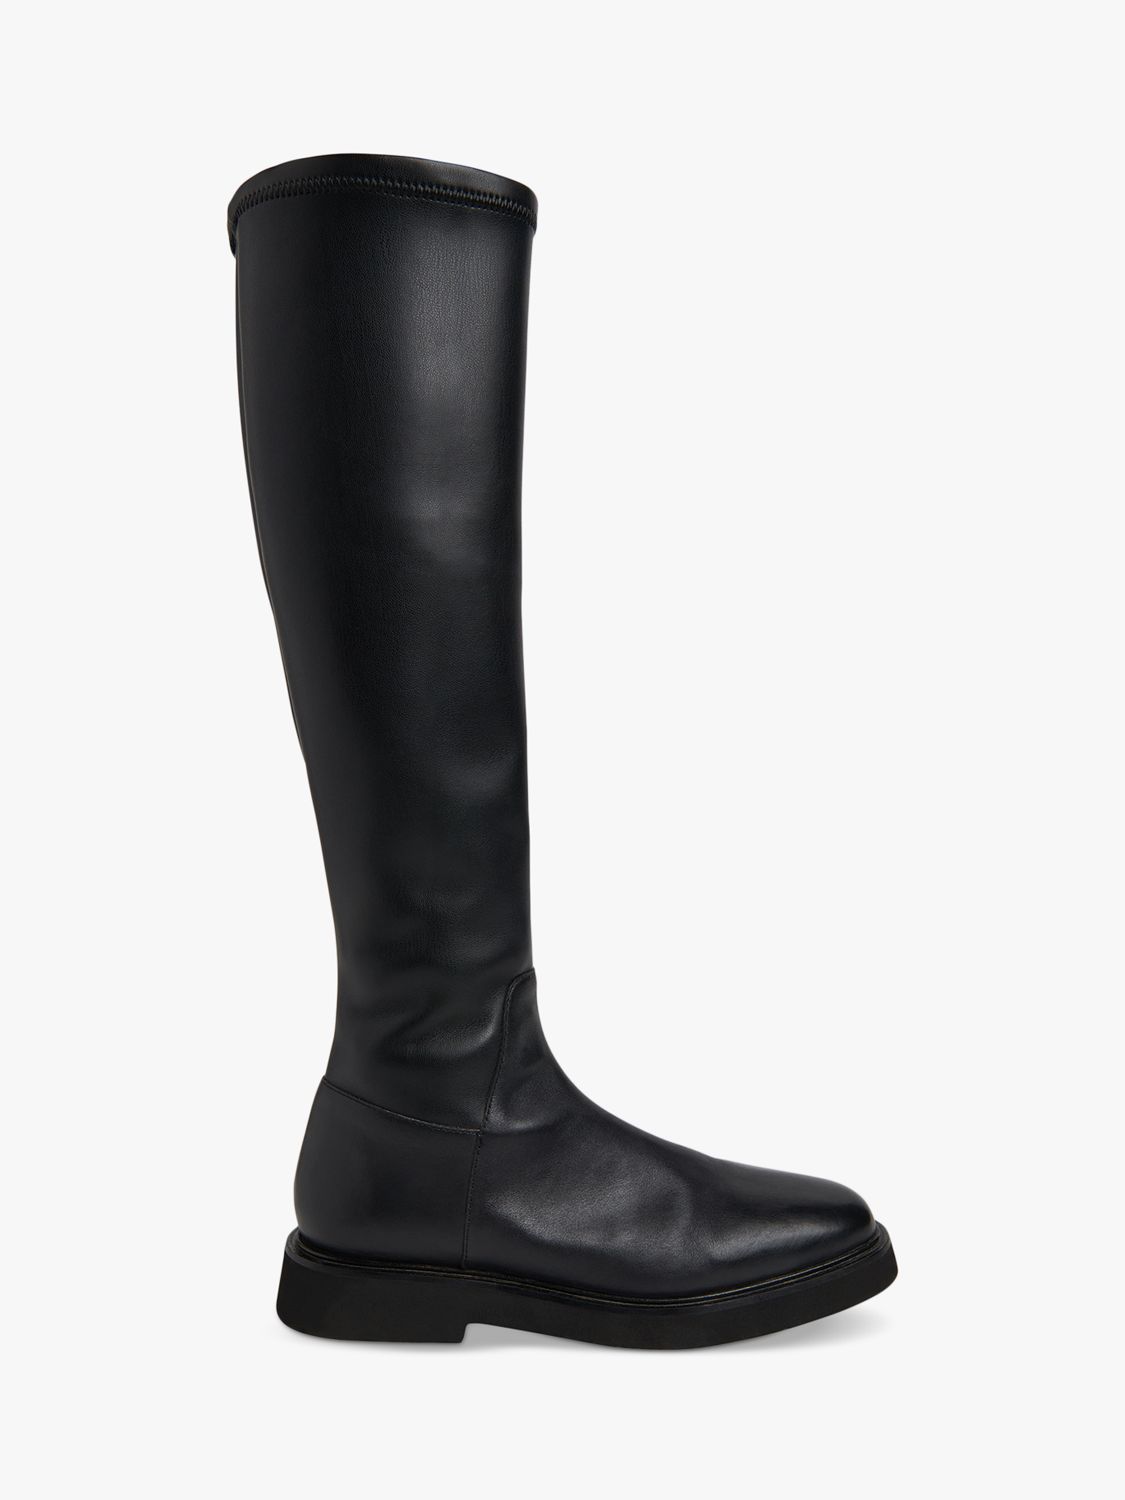 Whistles Quin Leather Stretch Knee High Boots, Black at John Lewis ...